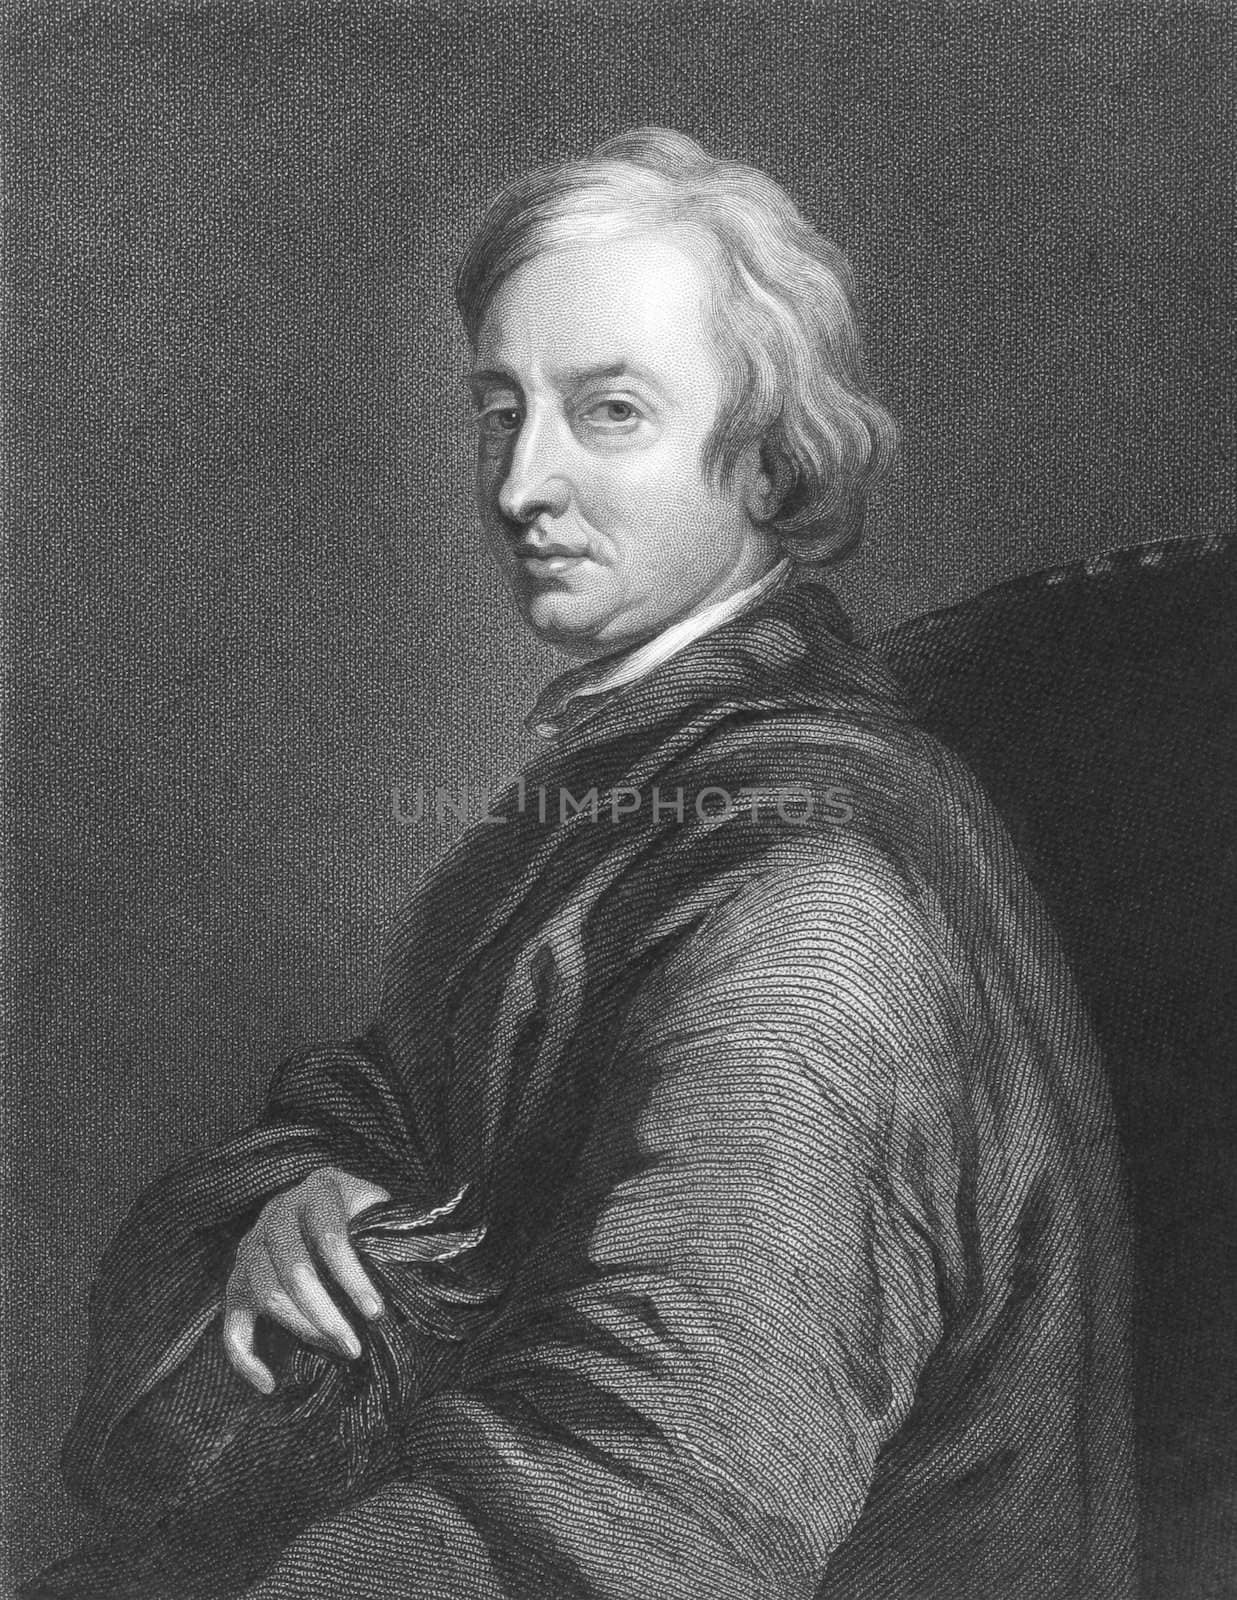 John Dryden (1631-1700) on engraving from the 1800s.
Influential English poet, literary critic, translator and playwright who dominated the literary scene of his day that it came to be known as the Age of Dryden. Engraved by C.E.Wagstaff from a painting by Houdoon and published in London by Charles Knight, Ludgate Street & Pall Mall East.